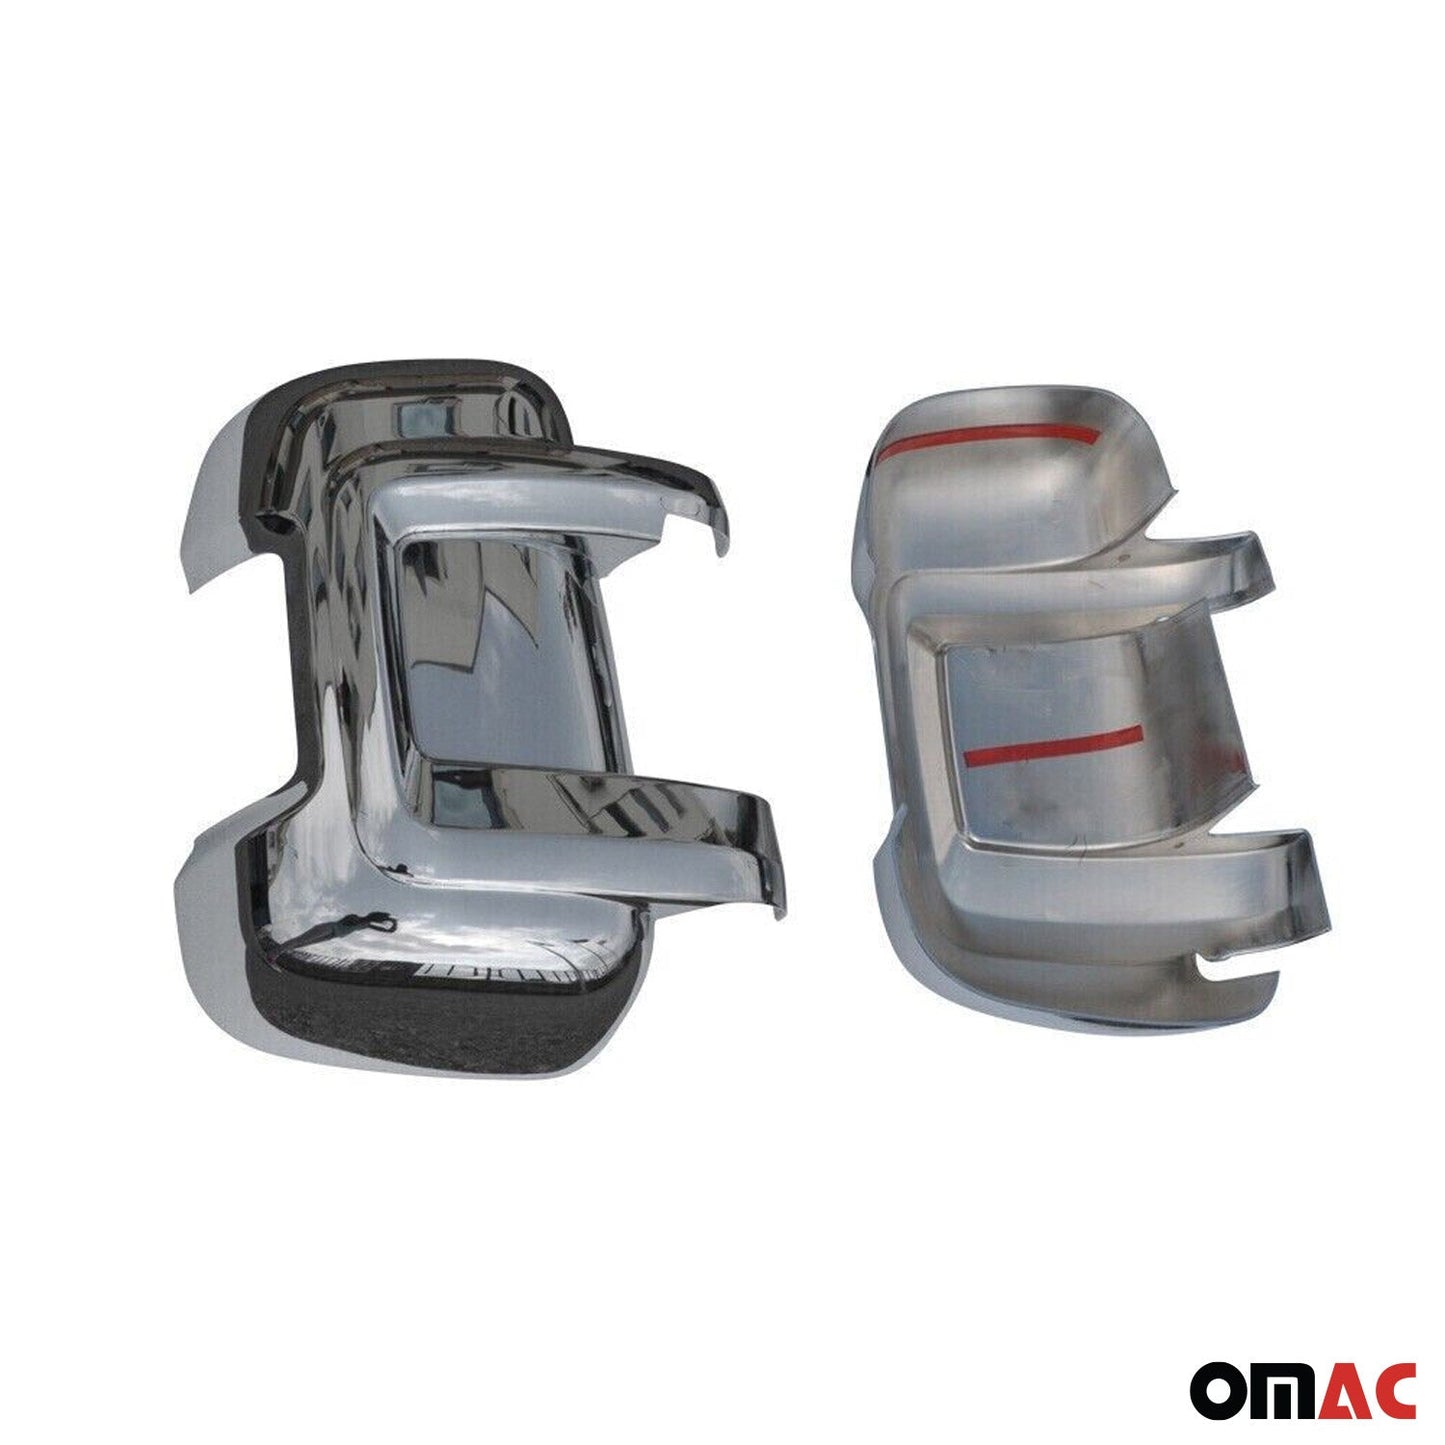 OMAC Side Mirror Cover Caps Fits RAM ProMaster 2014-2024 Chrome Silver 2 Pcs 2523111